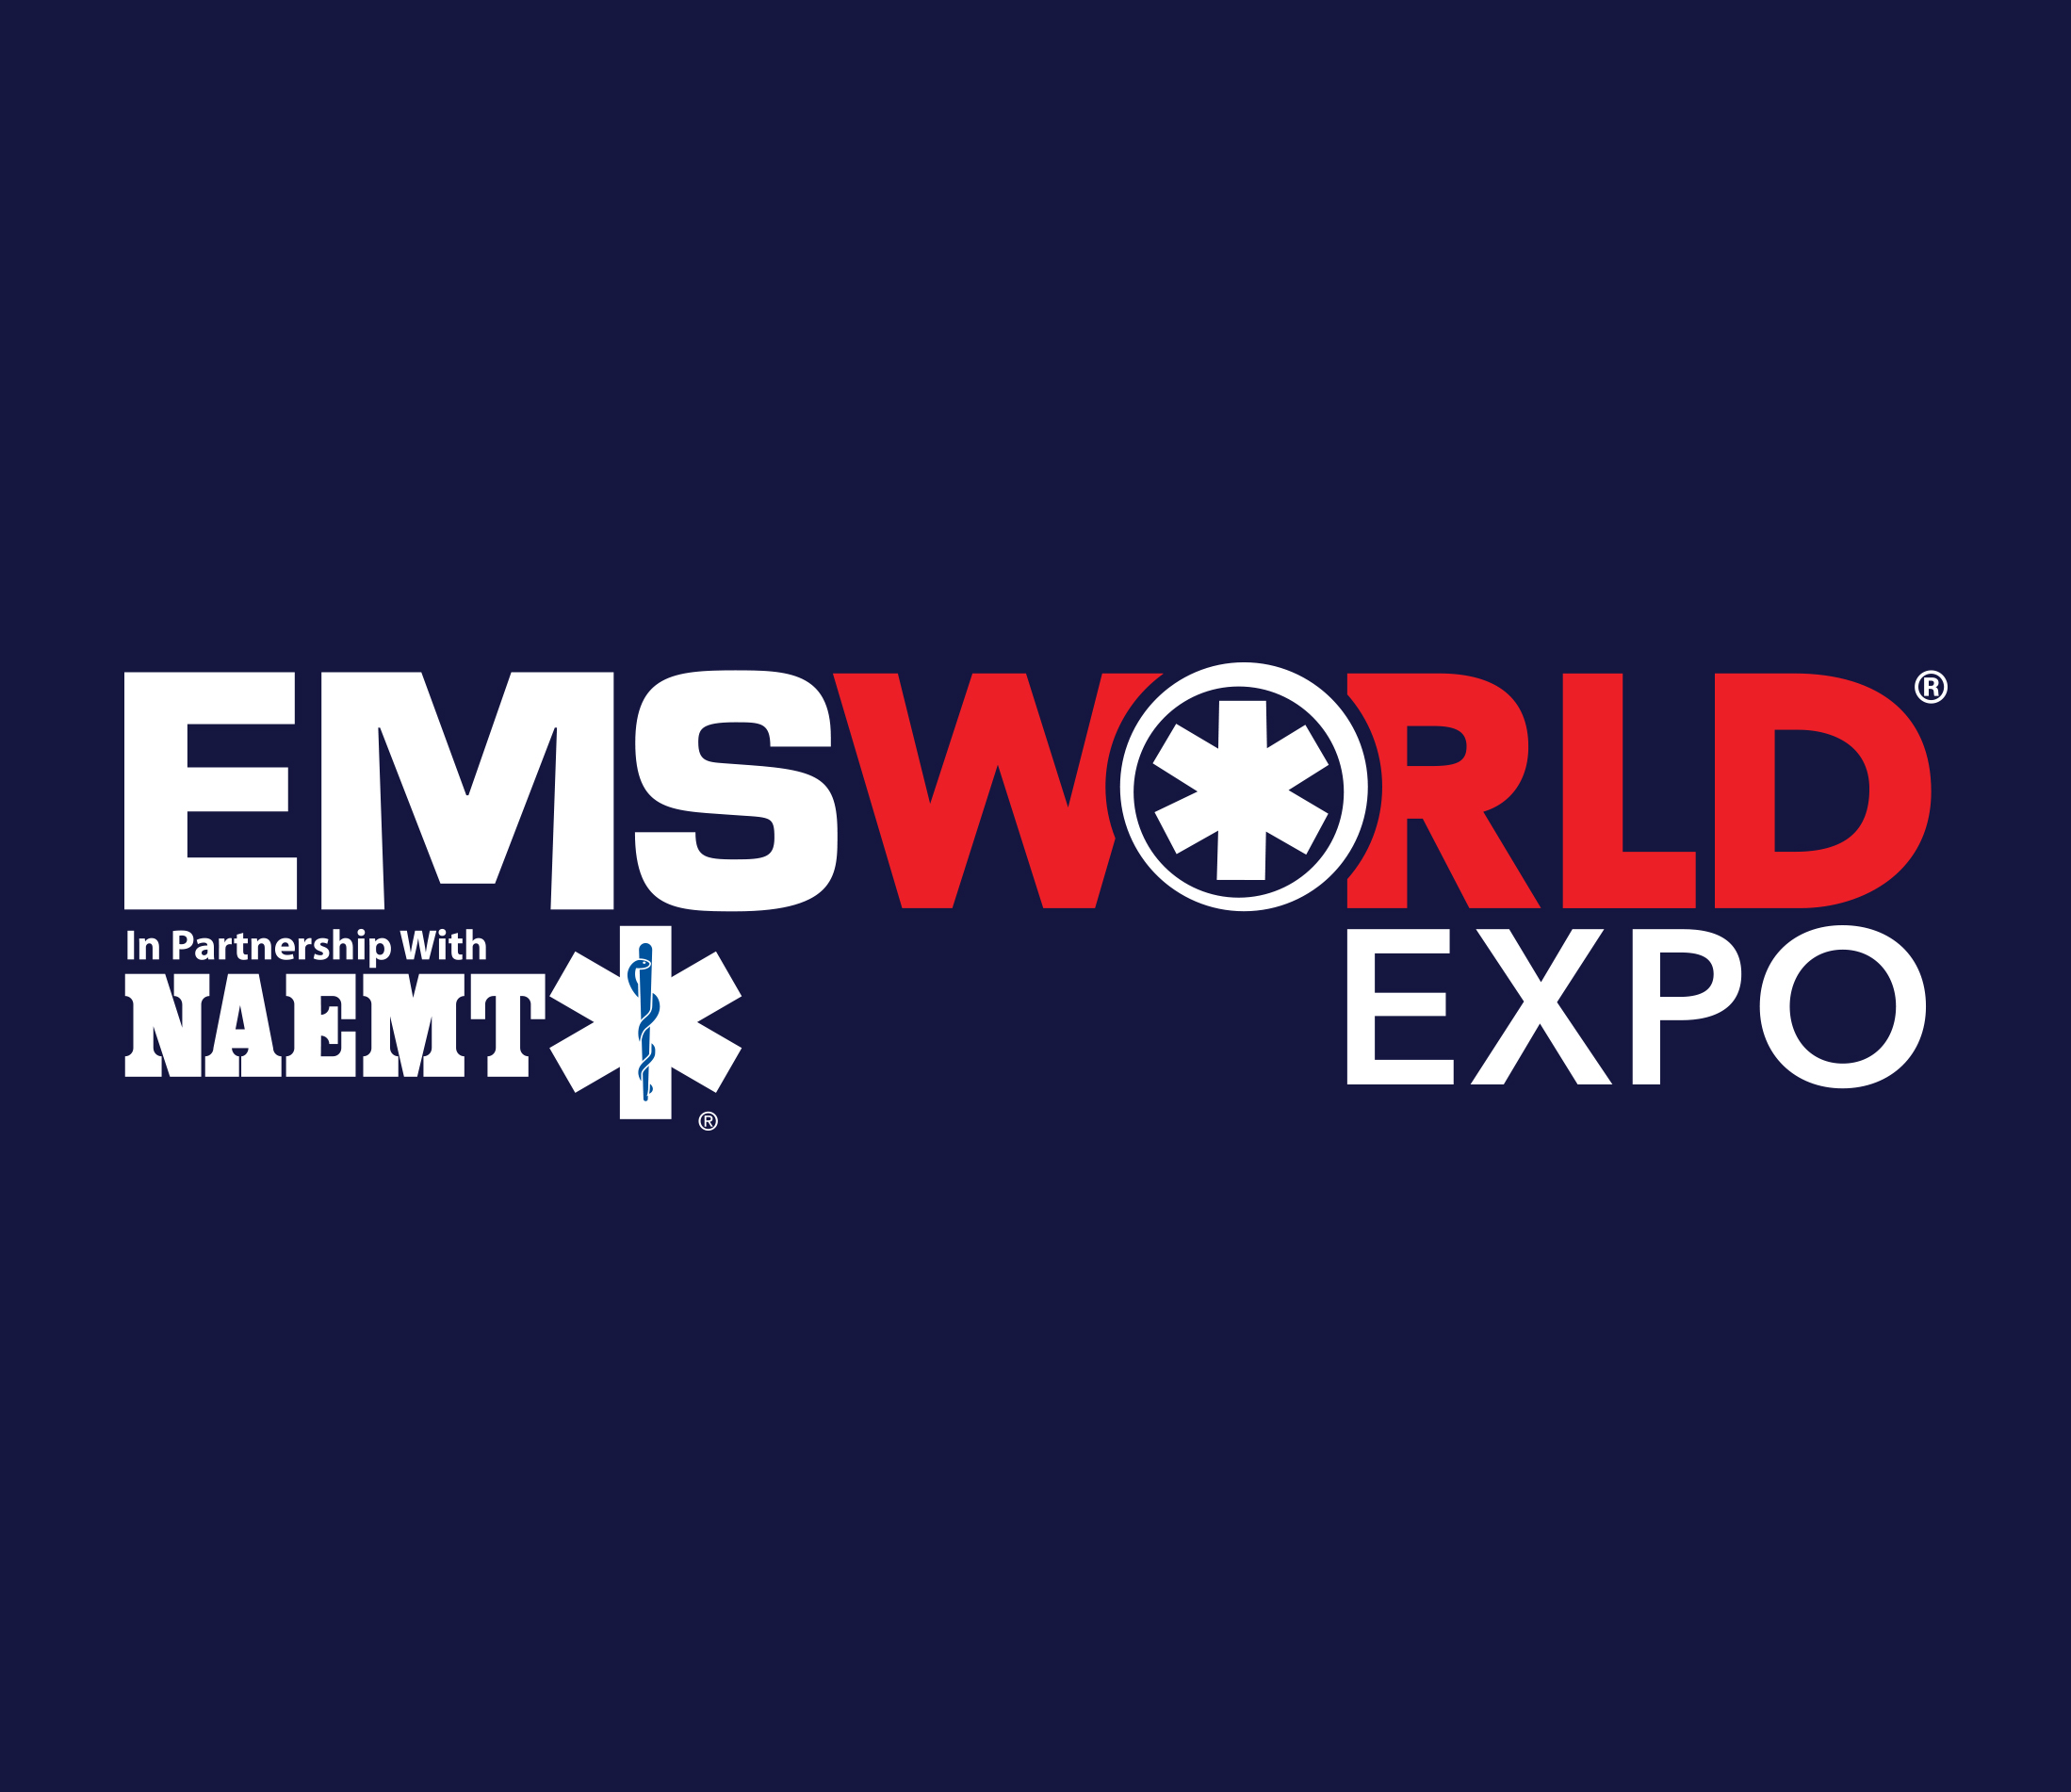 HMP’s EMS World Expo Recognized as One of the “Fastest 50” Trade Shows in Attendance and Square